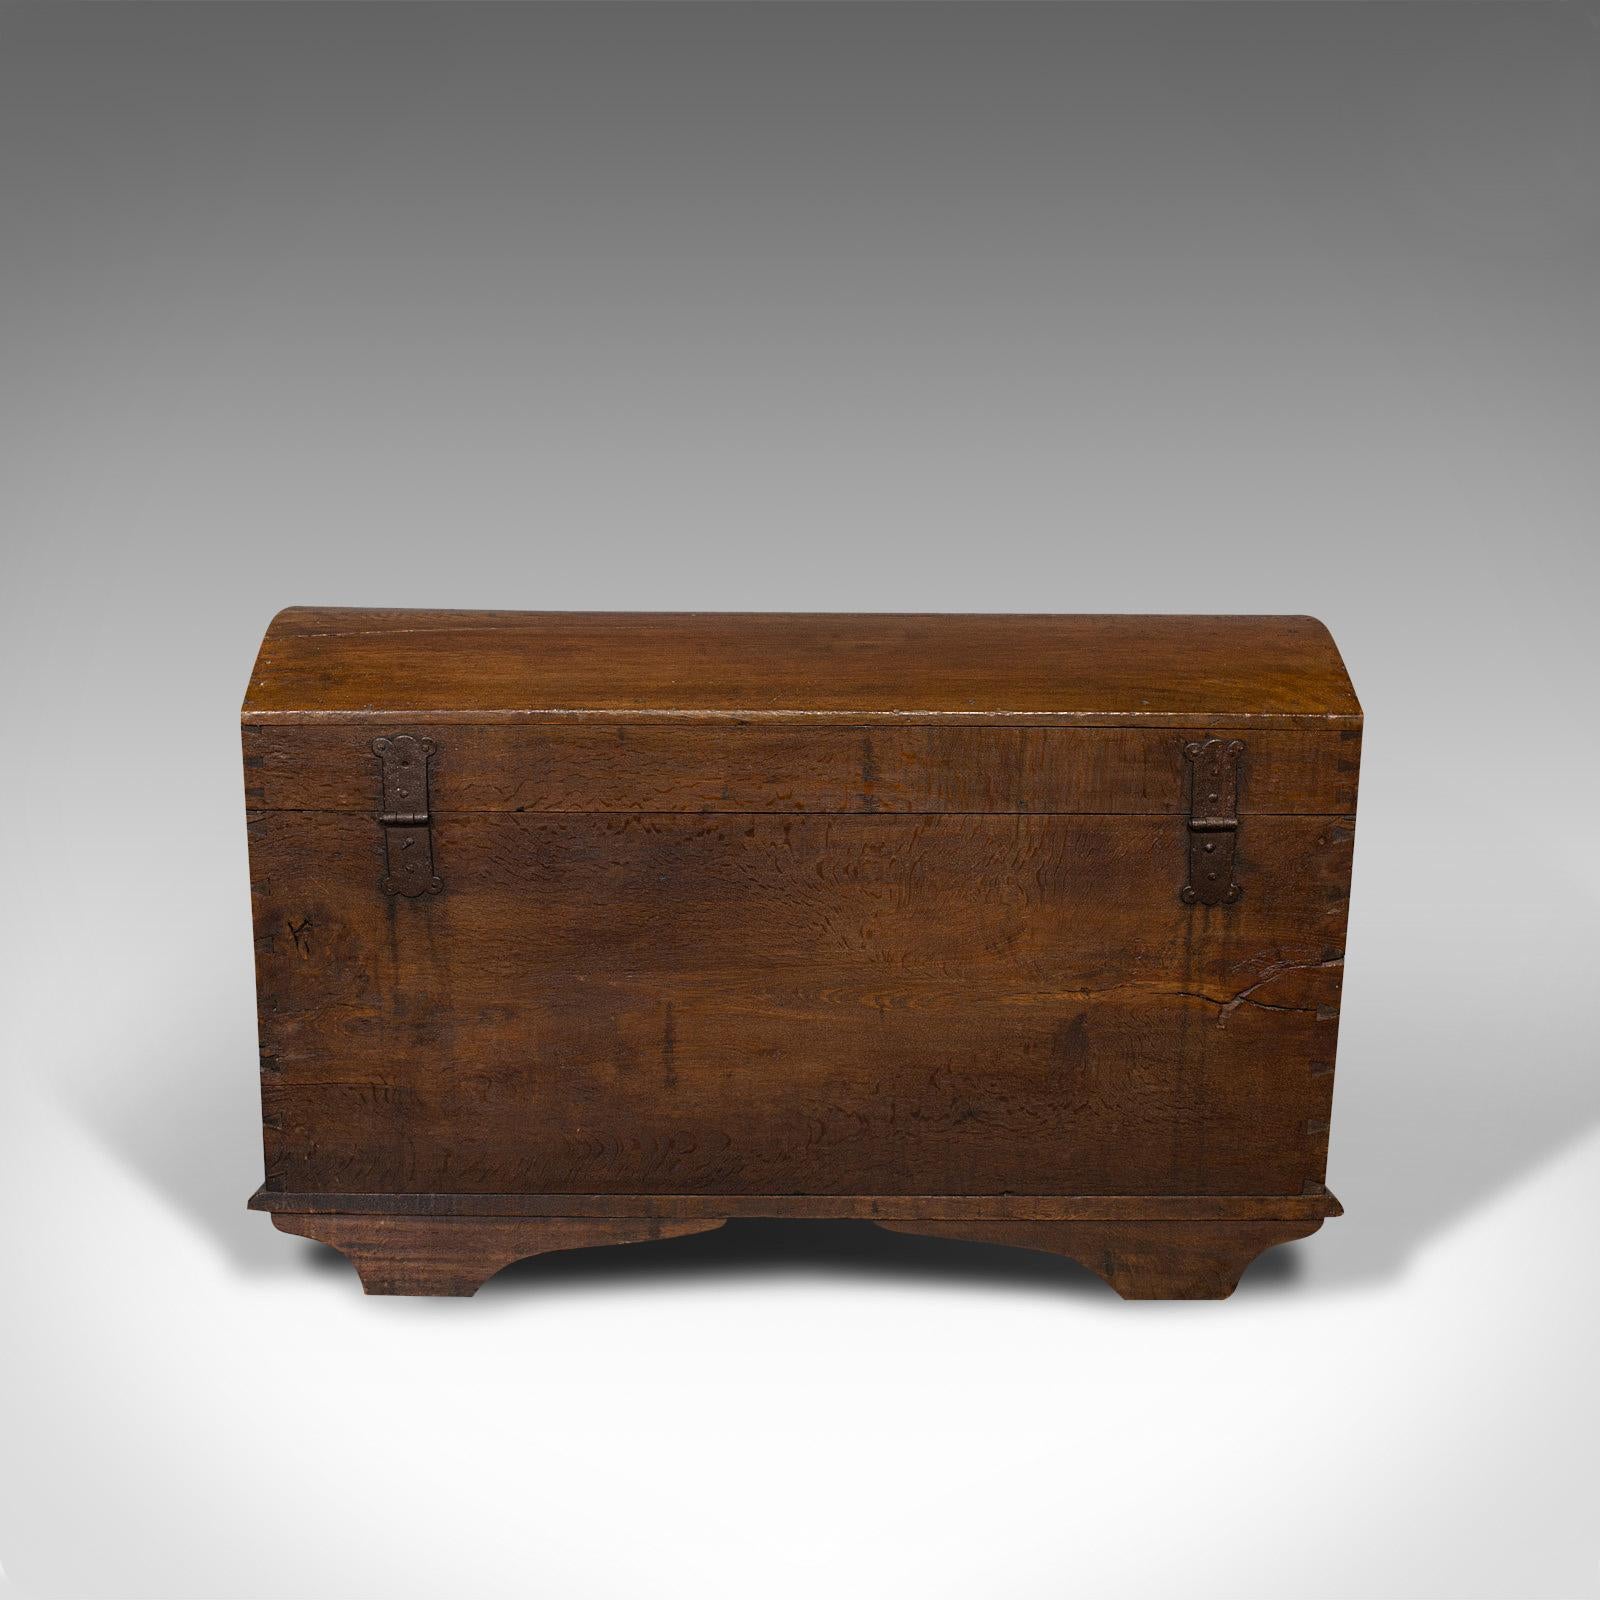 Large Antique Shipping Chest, English, Oak, Carriage Trunk, Georgian, circa 1800 For Sale 1